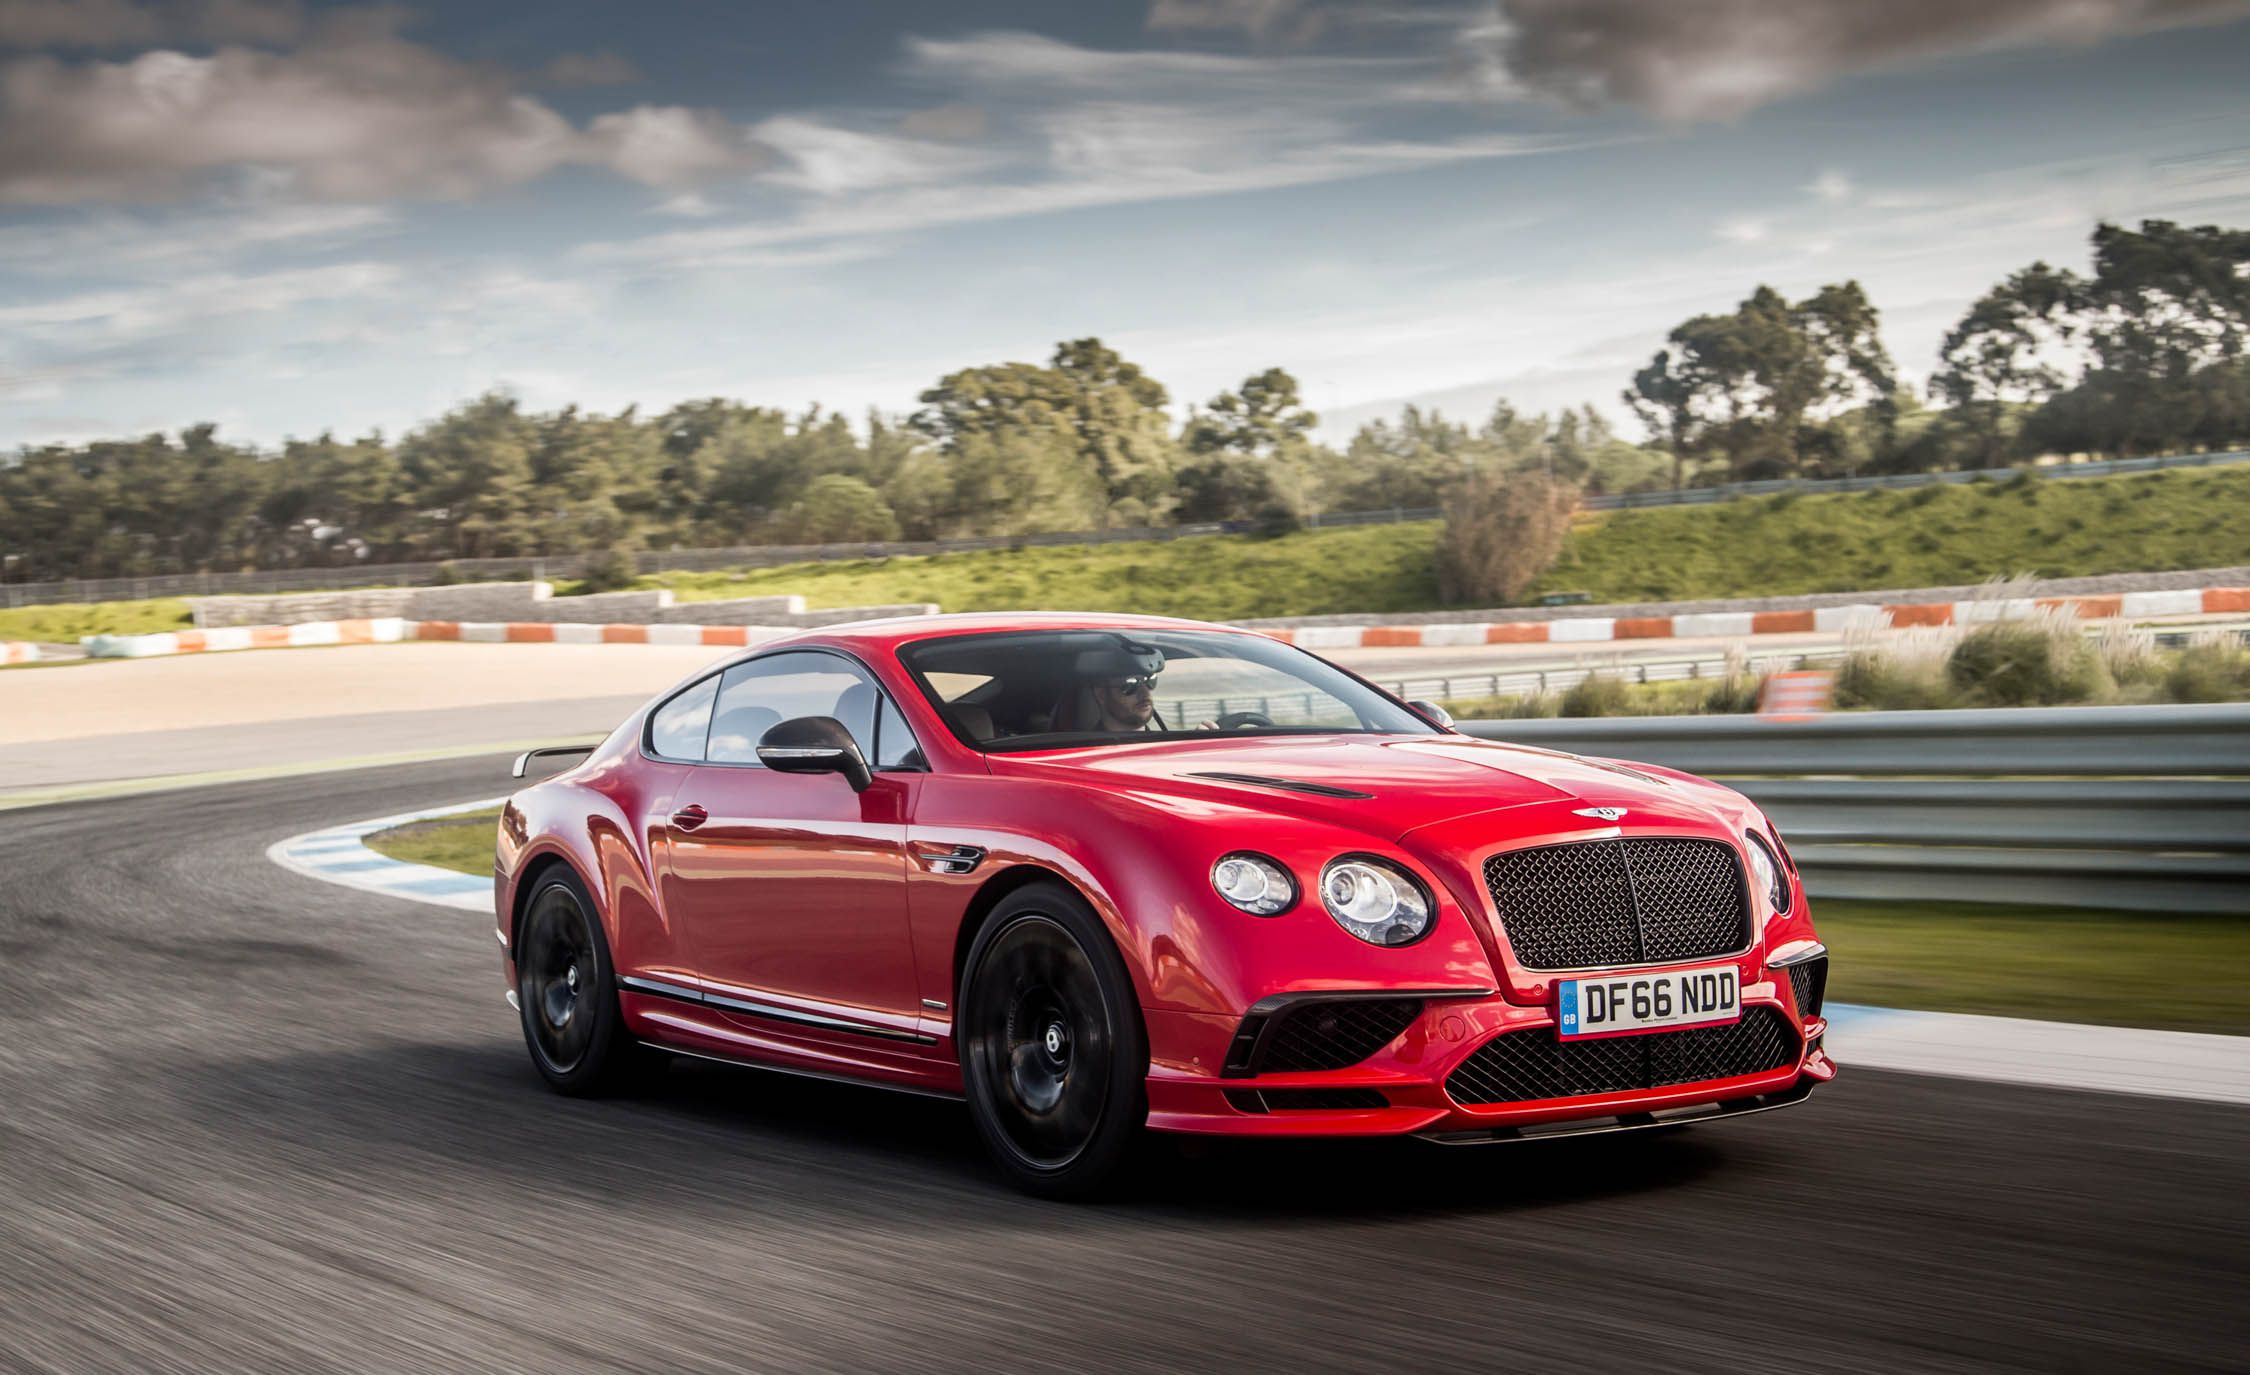 Bentley Continental Gt Supersports Wallpaper HD Image